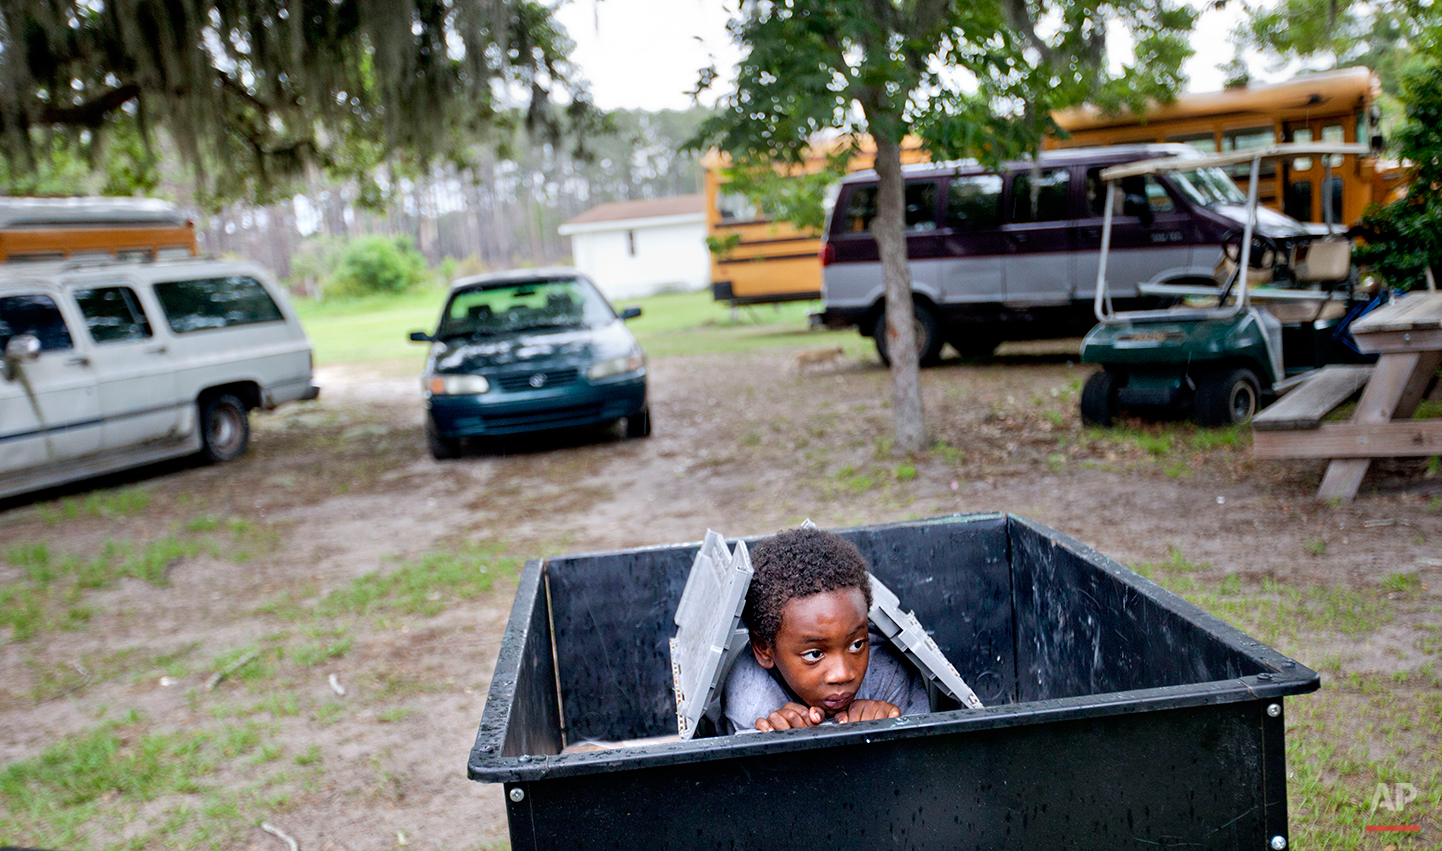  Jermarkest Wilson, 7, plays in a cart in the backyard of his home on Sapelo Island, Ga. on Sunday, June 9, 2013. Eight children catch a ferry every morning to attend school on the mainland since the last school operating on the island closed in 1978